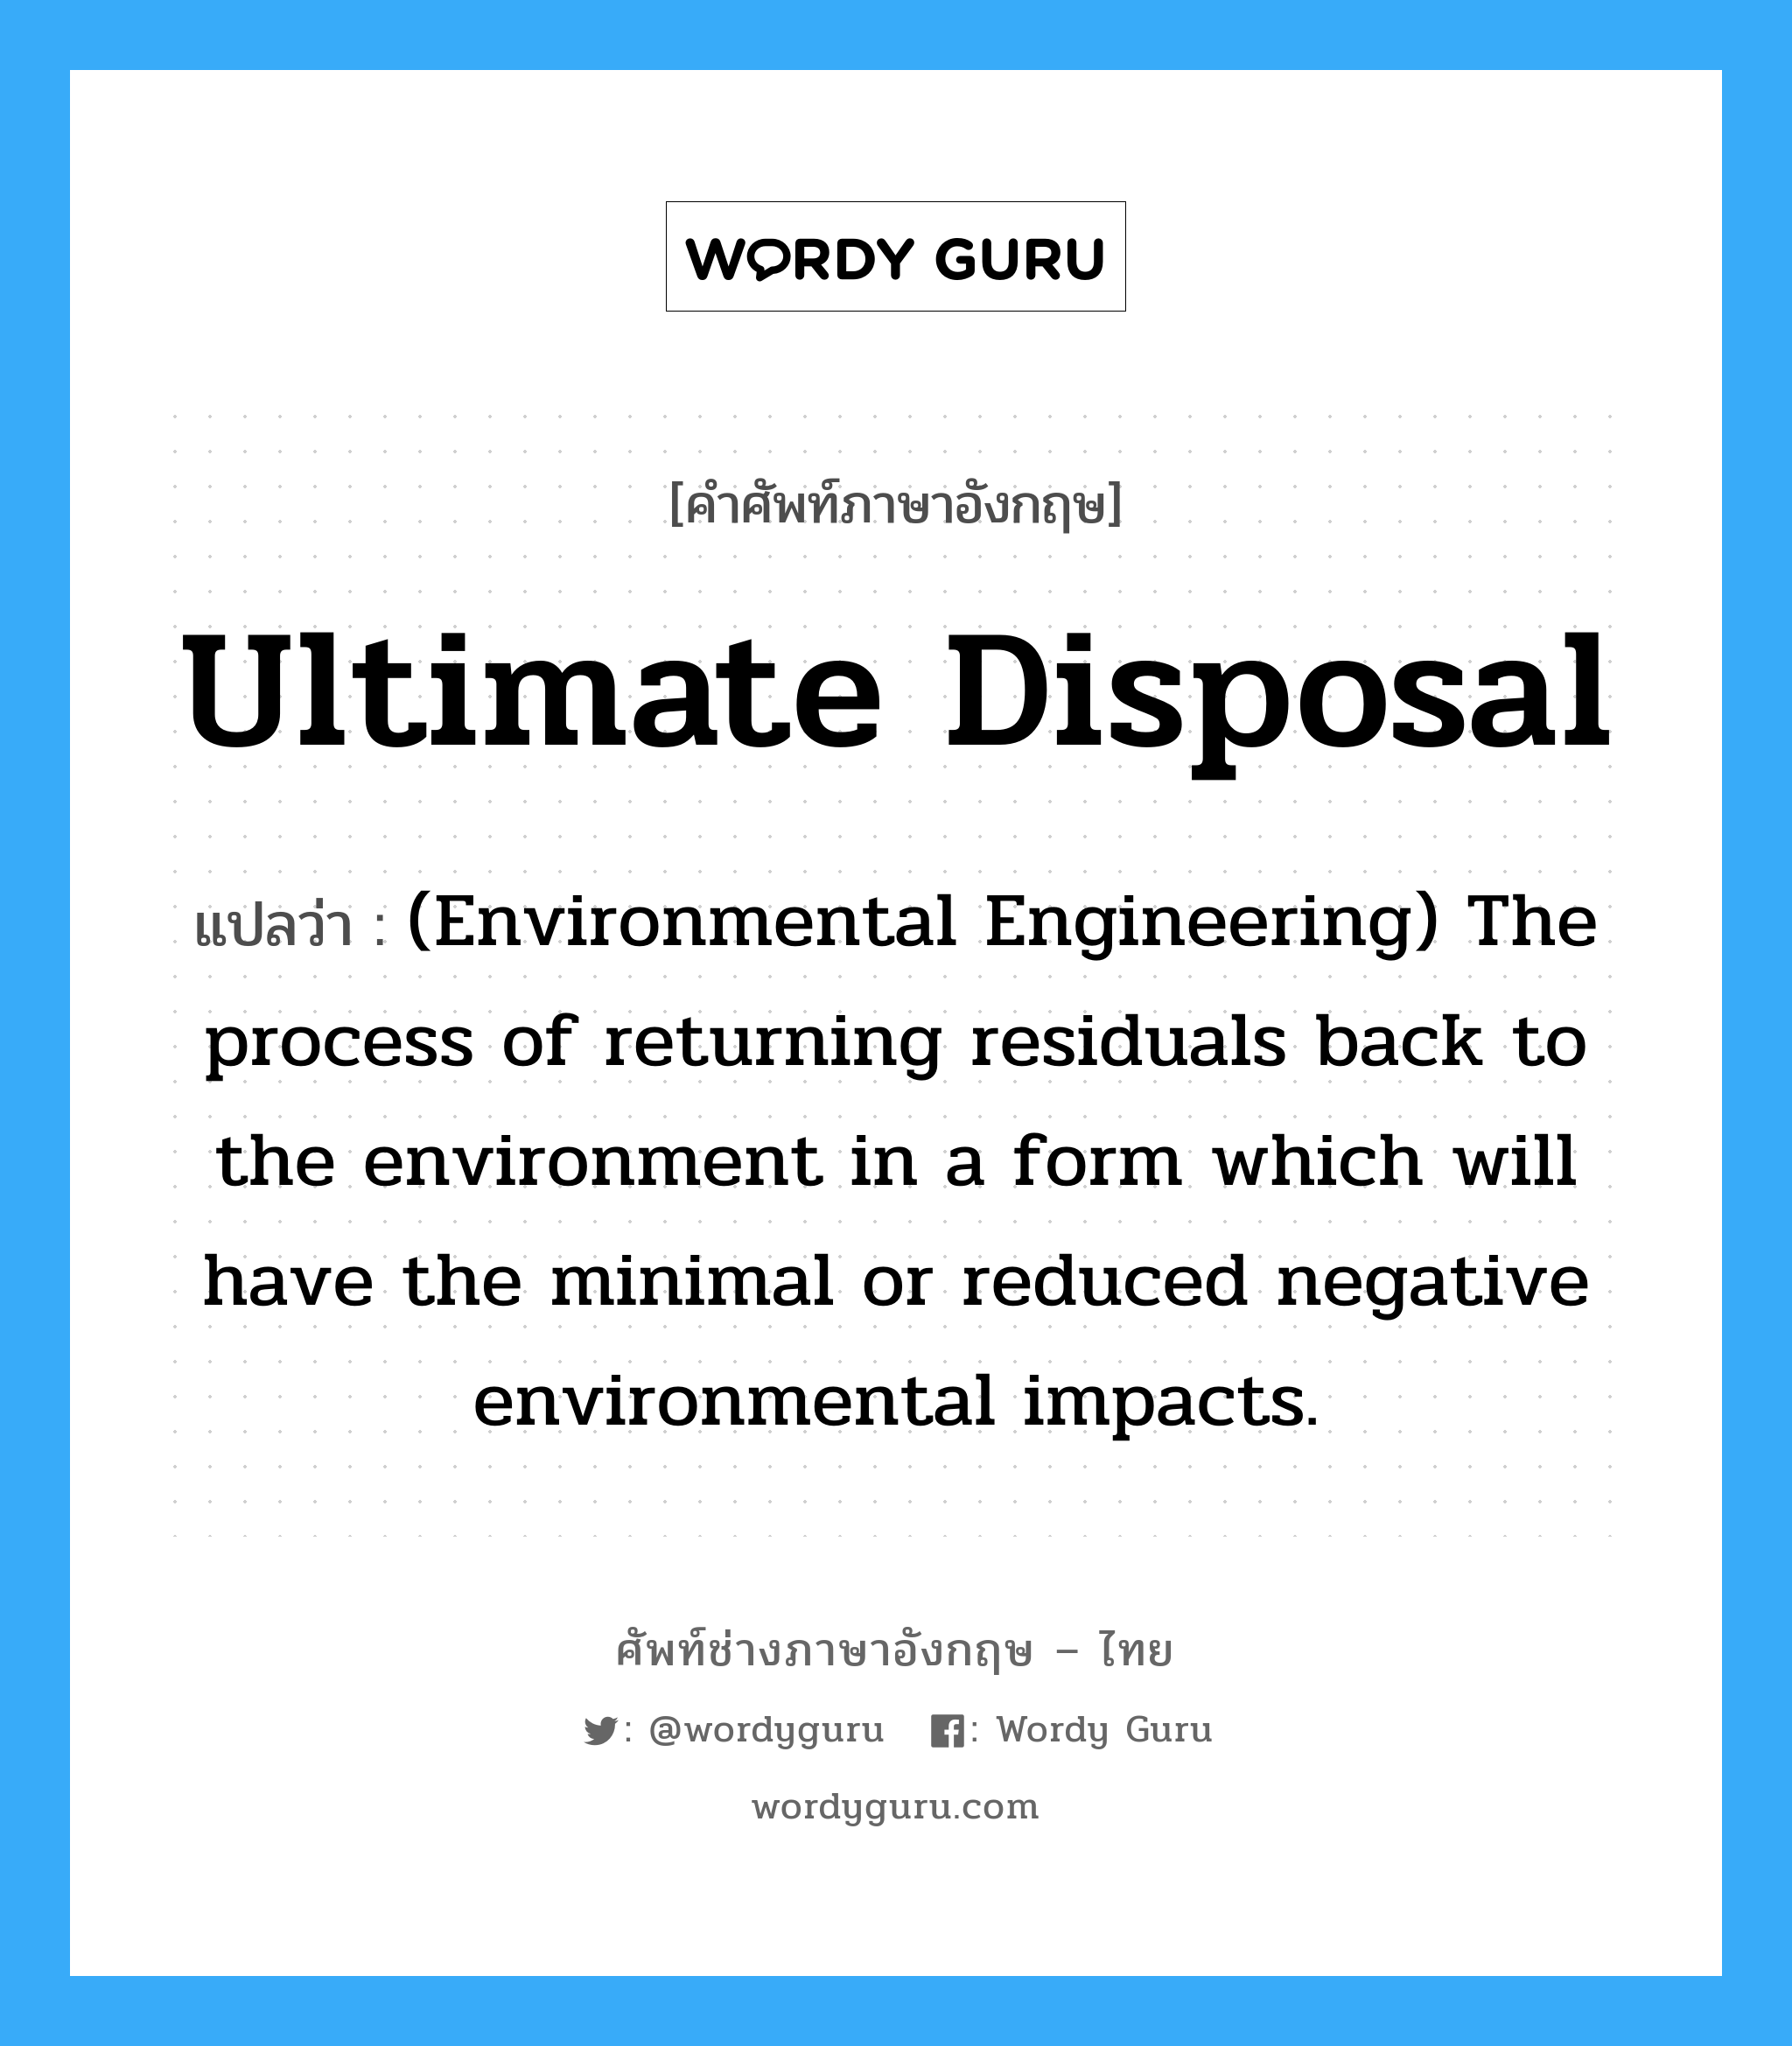 Ultimate disposal แปลว่า?, คำศัพท์ช่างภาษาอังกฤษ - ไทย Ultimate disposal คำศัพท์ภาษาอังกฤษ Ultimate disposal แปลว่า (Environmental Engineering) The process of returning residuals back to the environment in a form which will have the minimal or reduced negative environmental impacts.